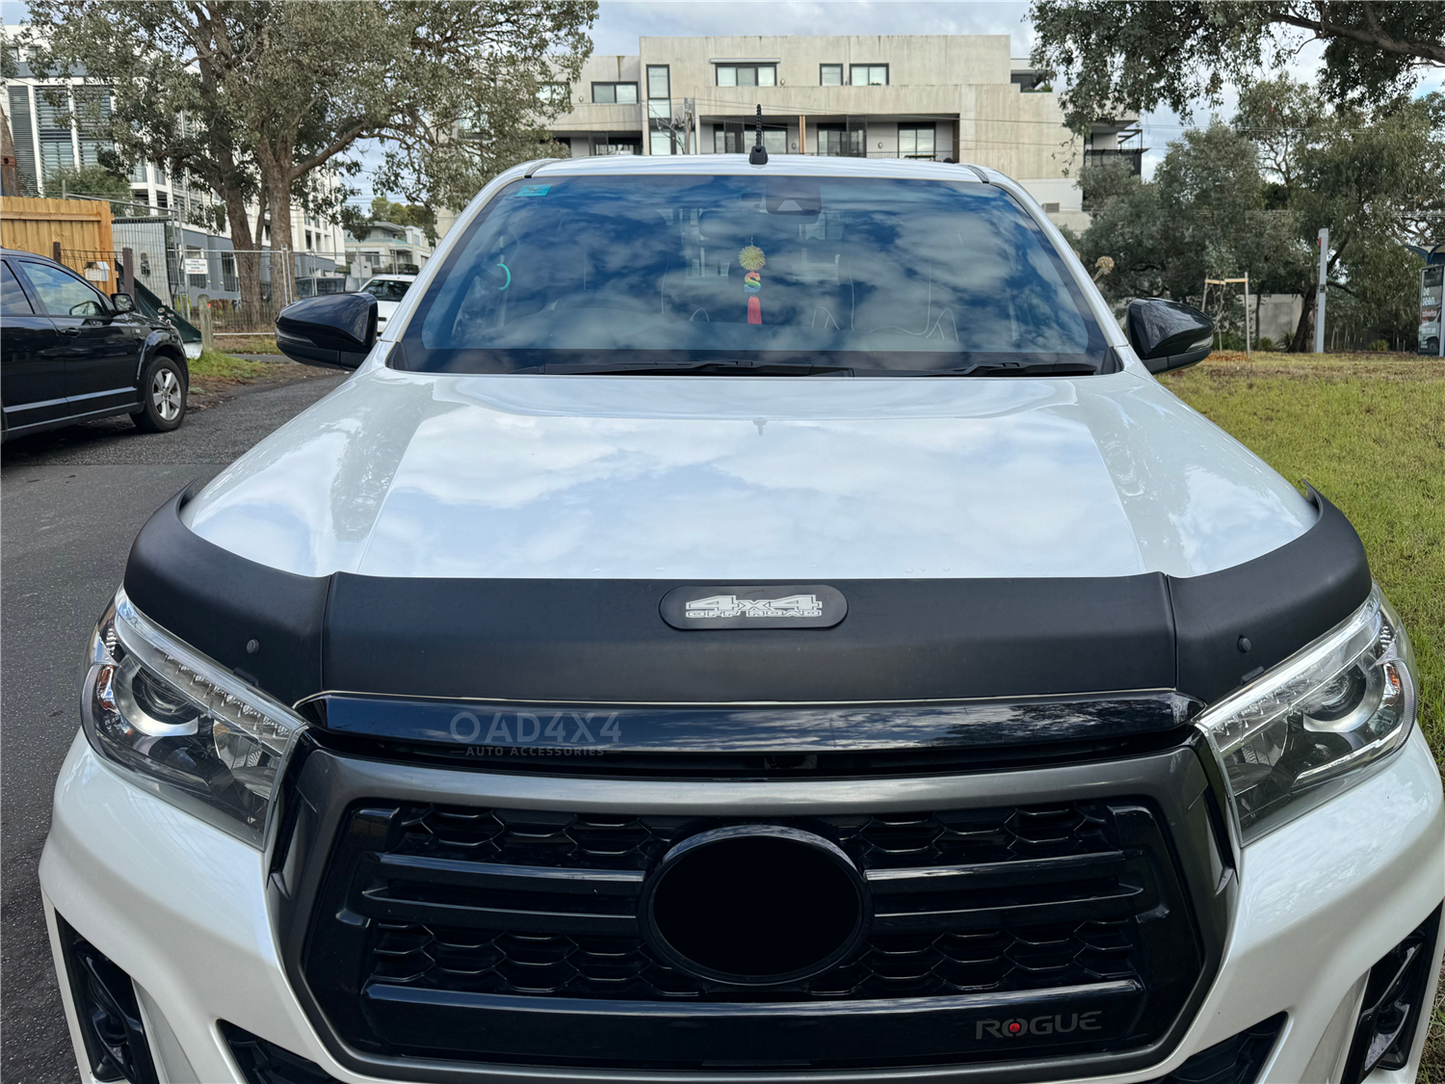 Injection Modeling Bonnet Protector & Injection Weathershield Weather Shields Window Visor for Toyota  Hilux Single / Extra Cab 2015-2020